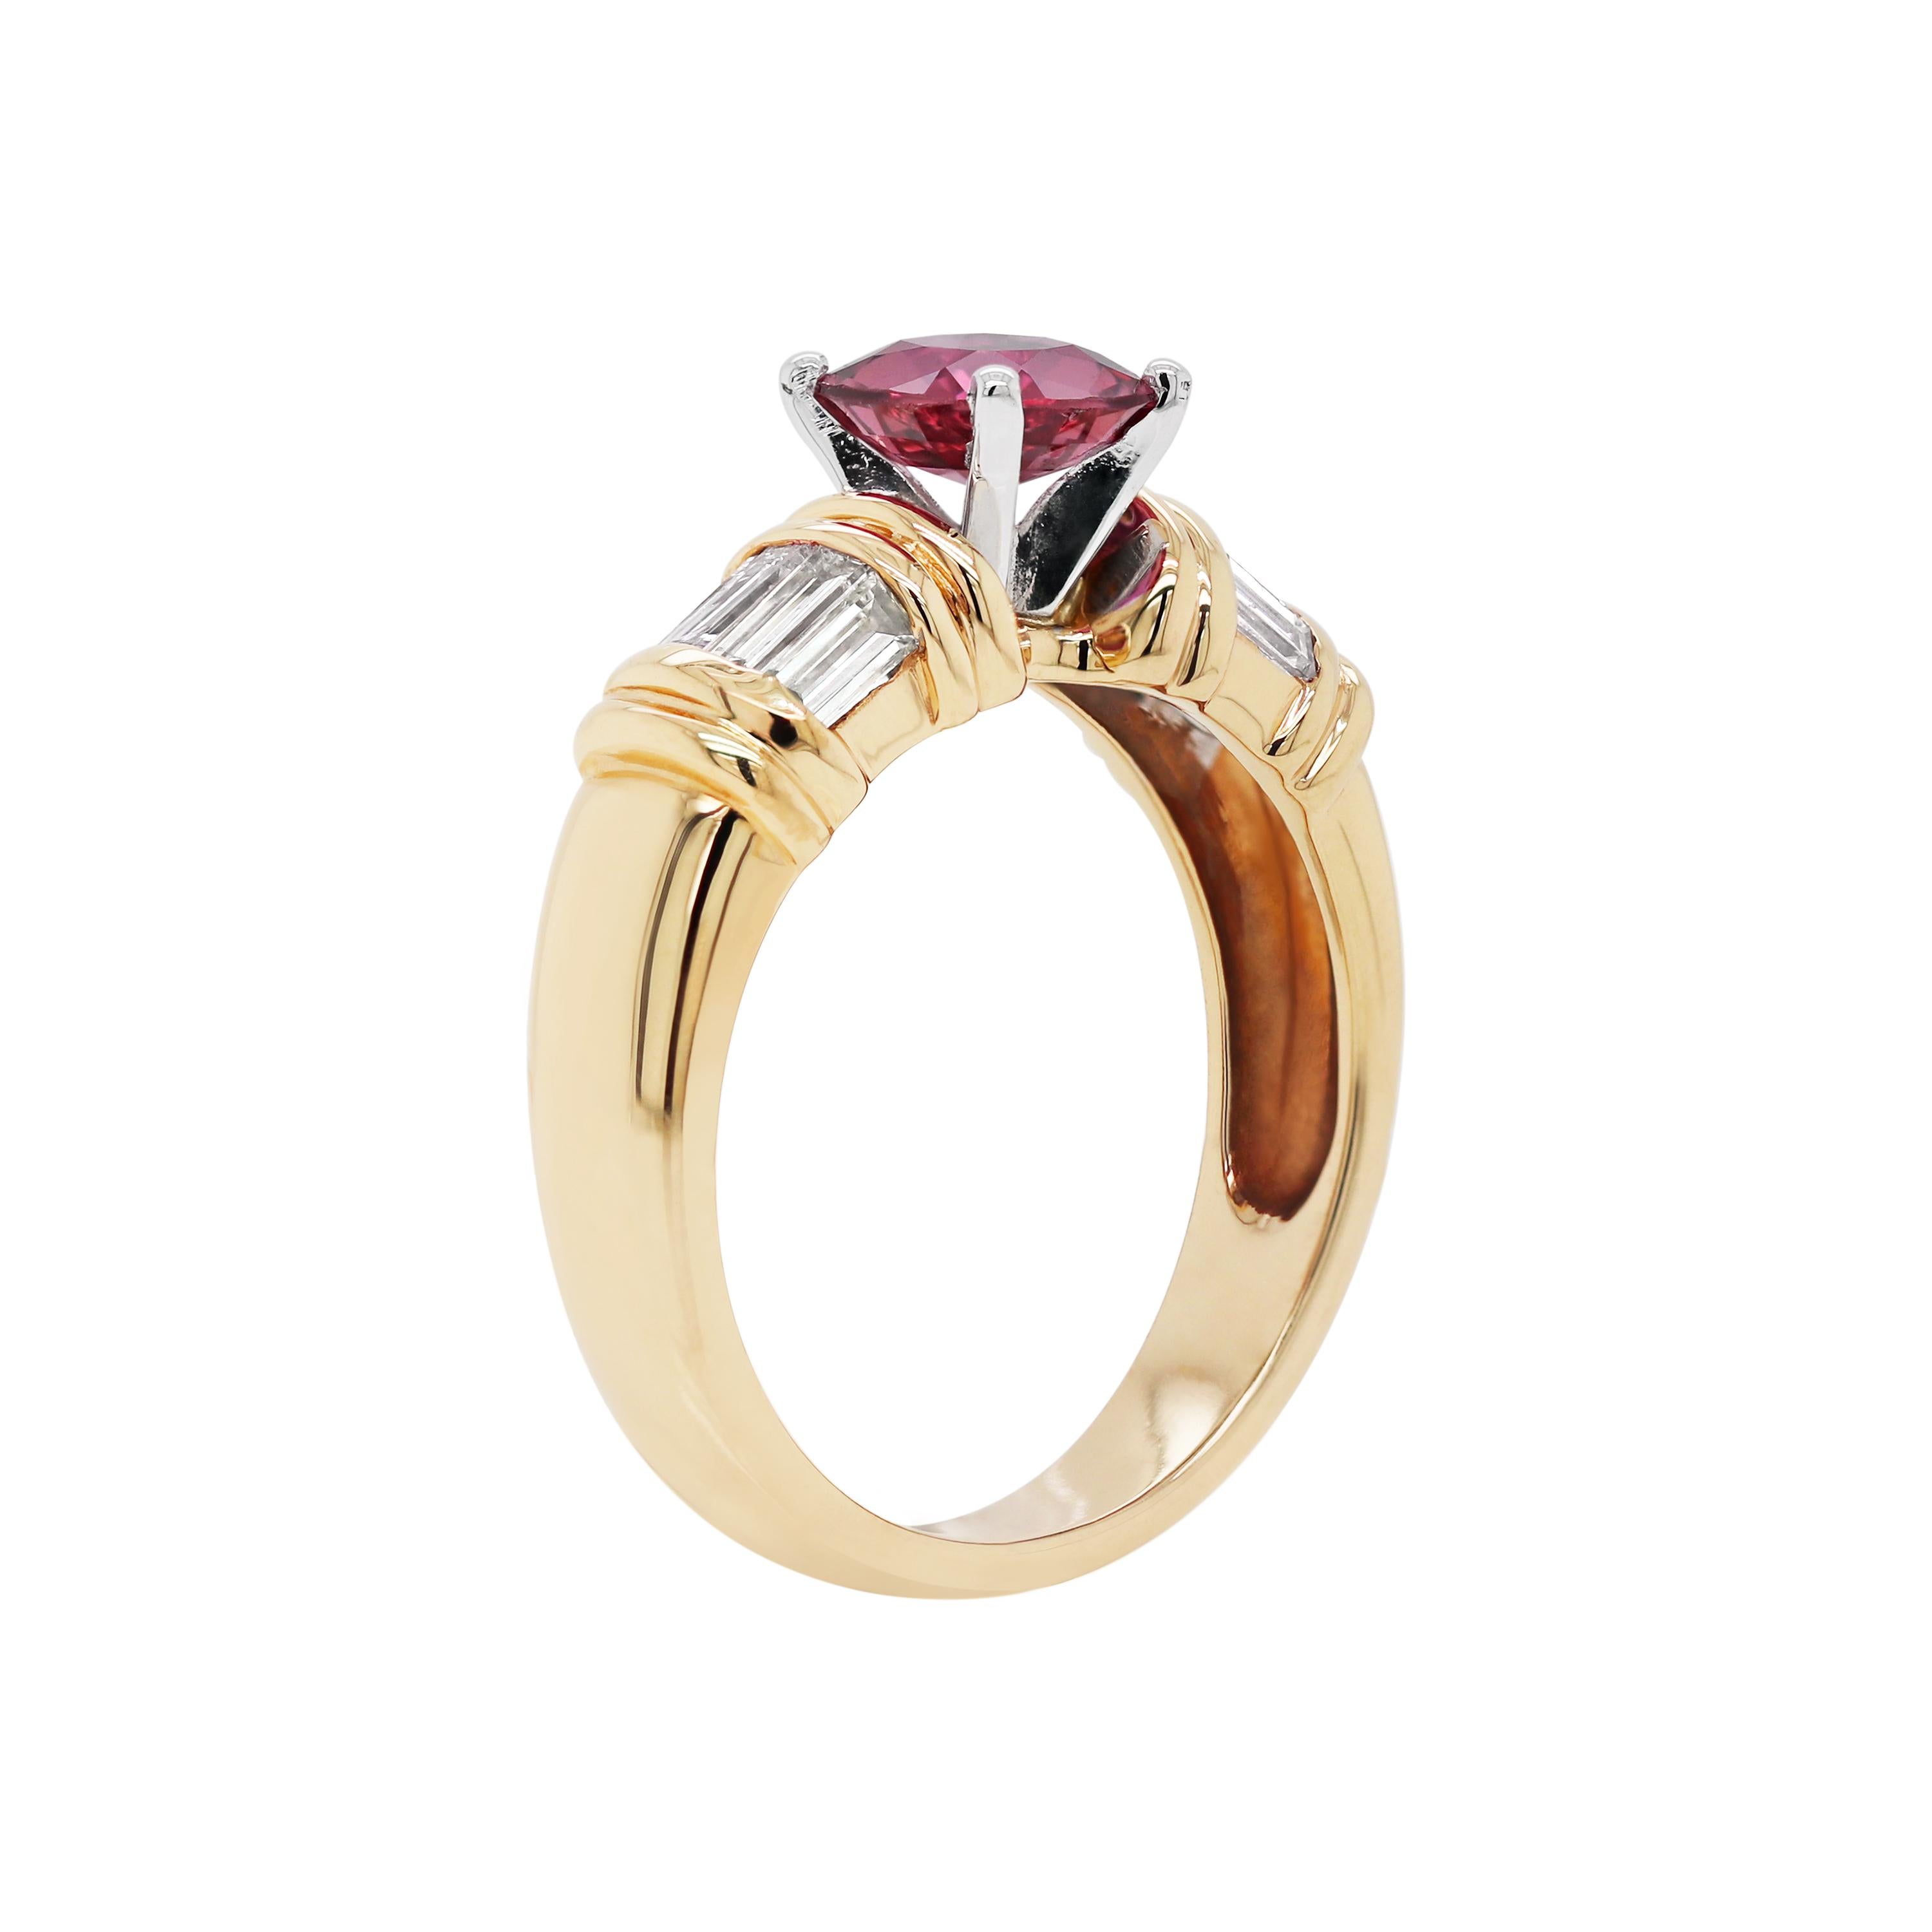 Cushion Cut 1.01 Carat Pink Sapphire and Diamond 18 Carat Yellow Gold Ring For Sale